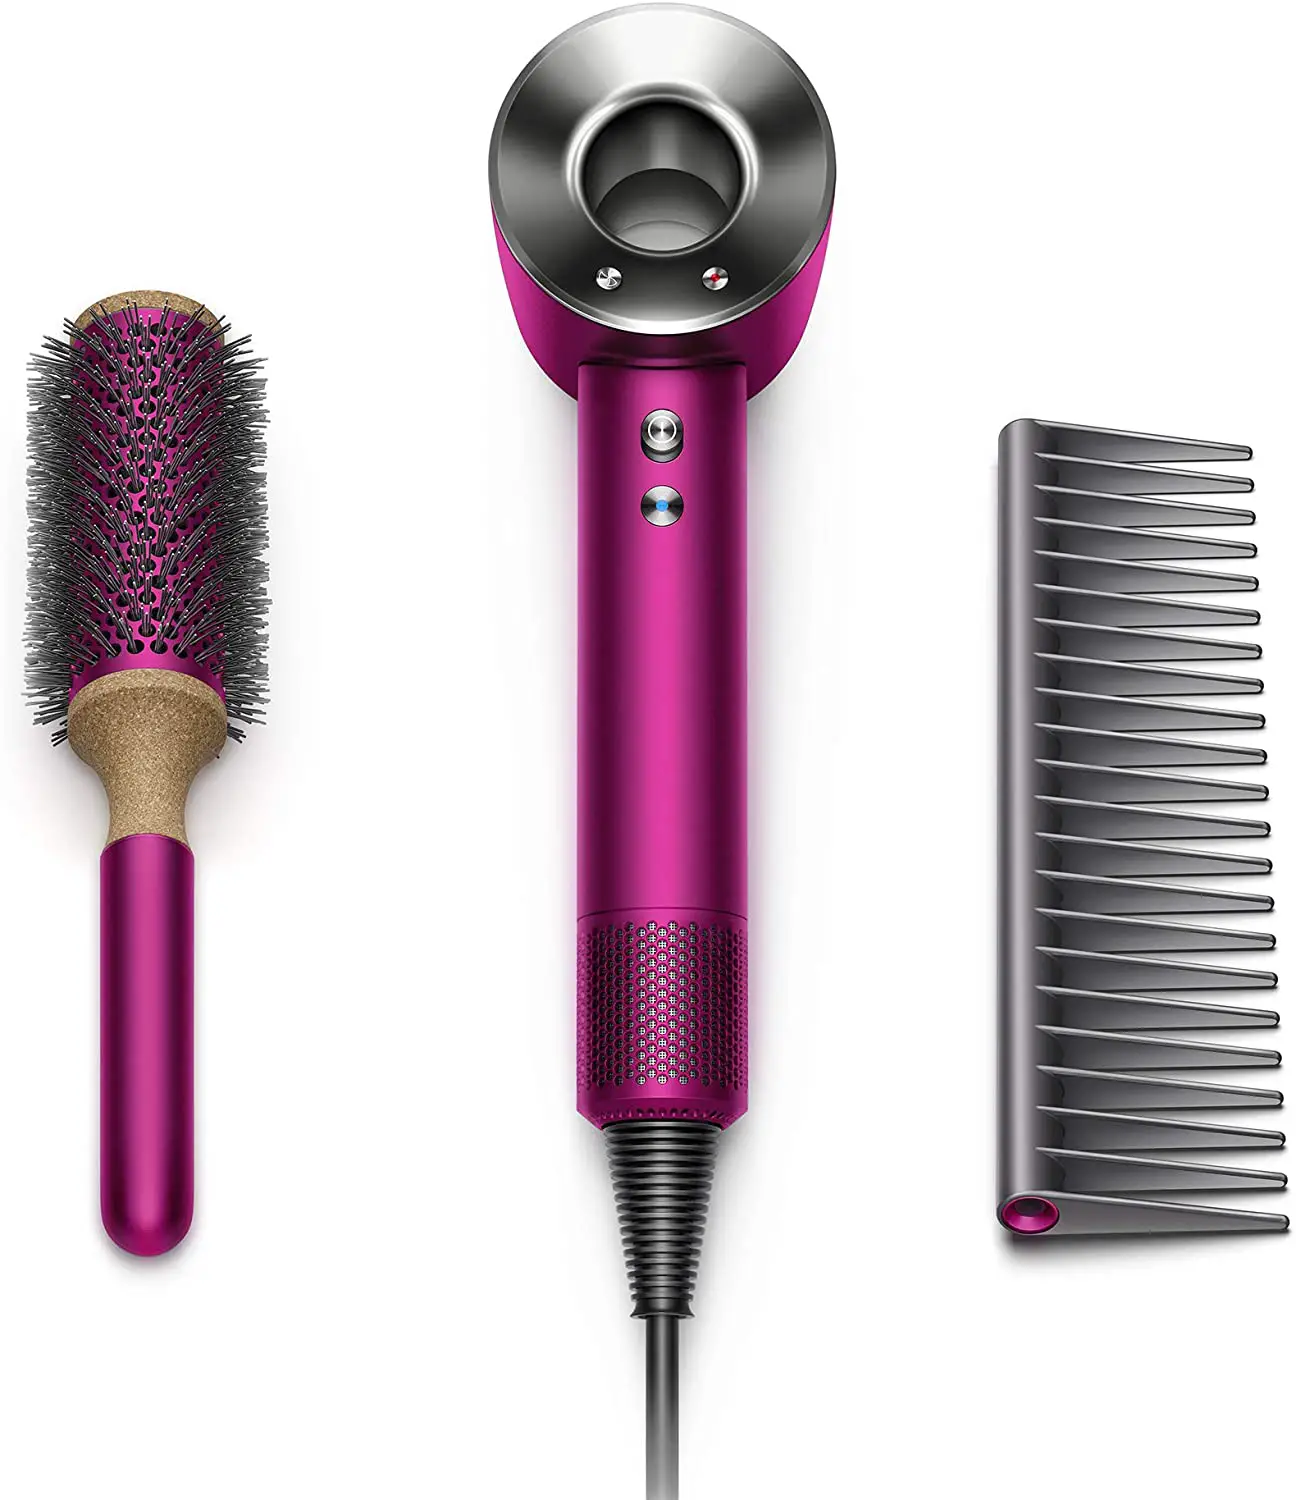 Dyson Supersonic Hair Dryer Limited Edition Gift Set, Fuchsia:Nickel for natural hair